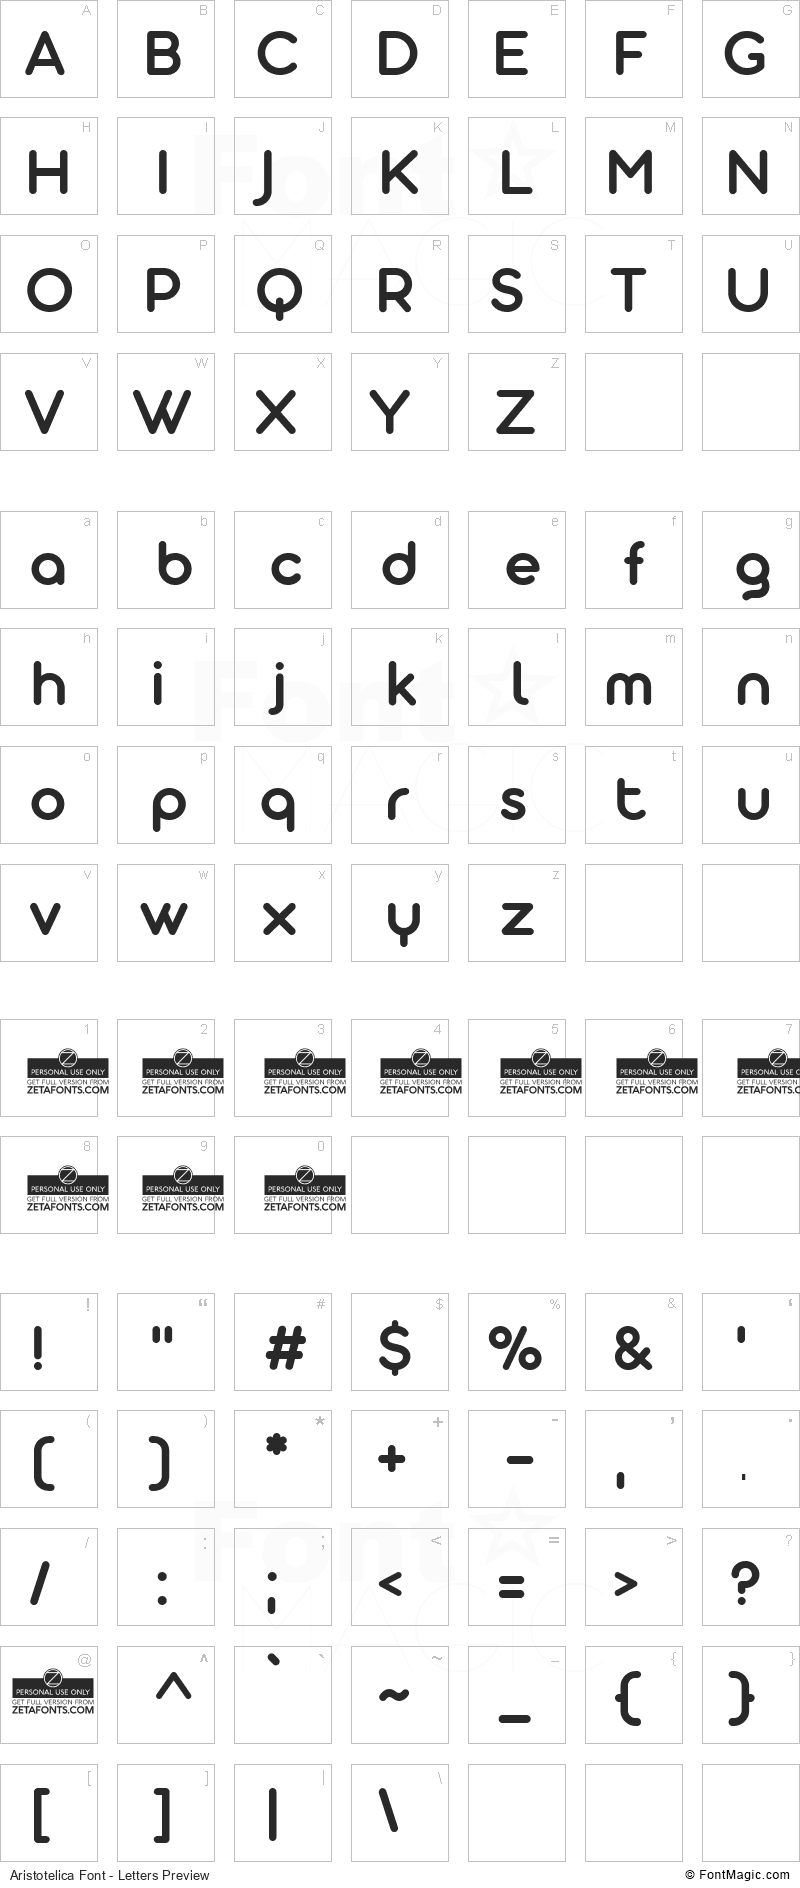 Aristotelica Font - All Latters Preview Chart